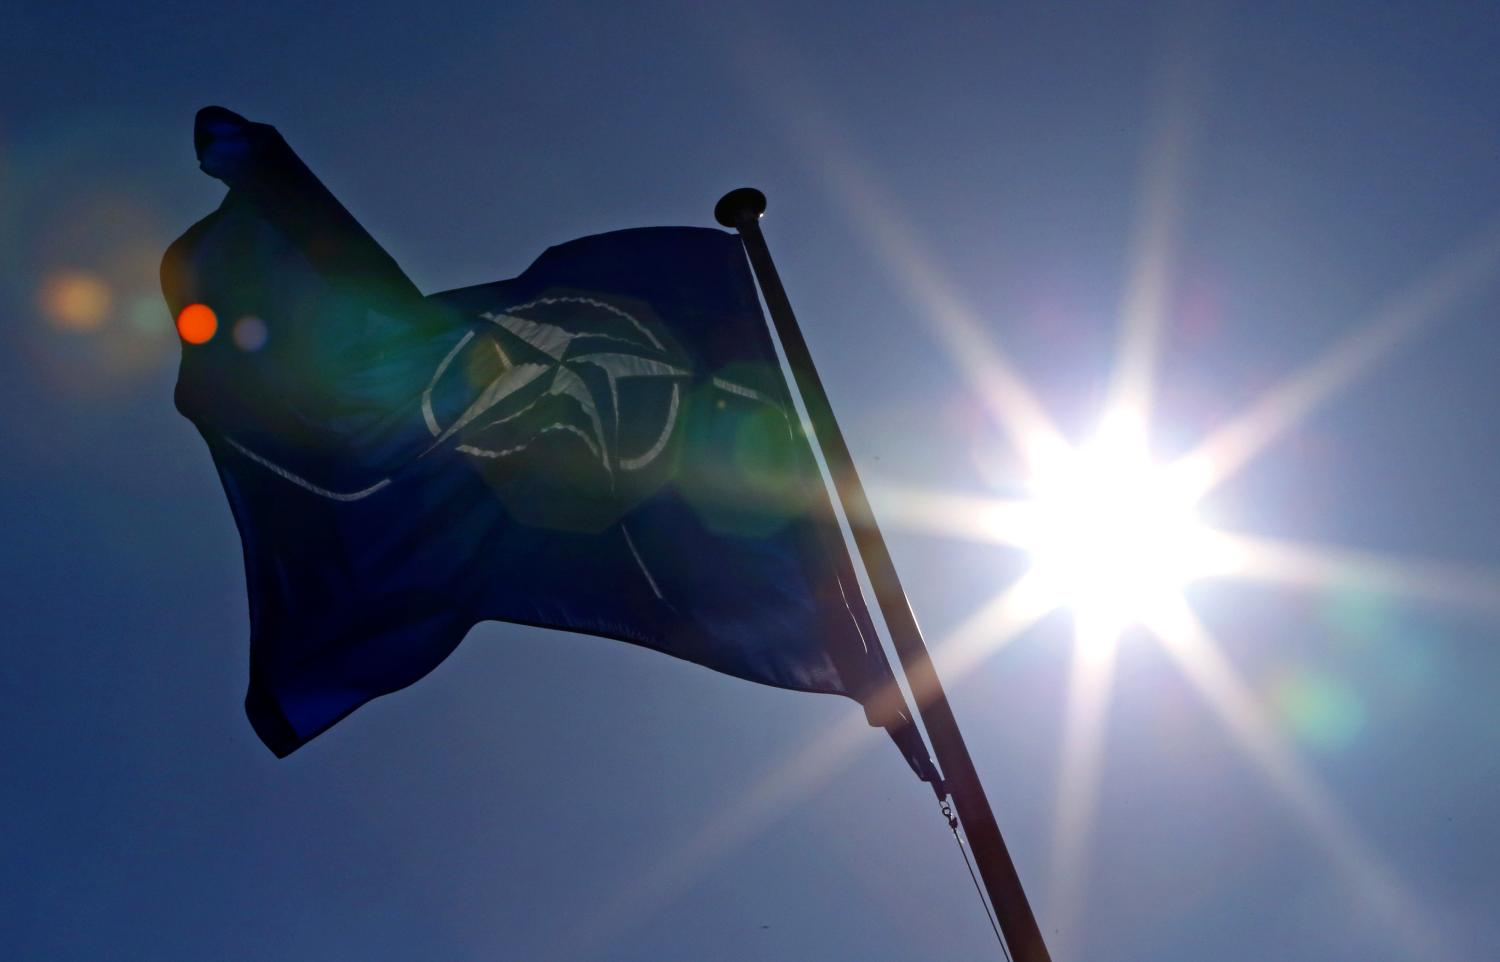 A NATO flag flies at the Alliance headquarters in Brussels during a NATO ambassadors meeting on the situation in Ukraine and the Crimea region, March 2, 2014. Russia is threatening peace in European via its military actions in Ukraine and must immediately de-escalate tensions, Rasmussen said on Sunday. REUTERS/Yves Herman (BELGIUM - Tags: POLITICS CONFLICT MILITARY) - RTR3FWFO